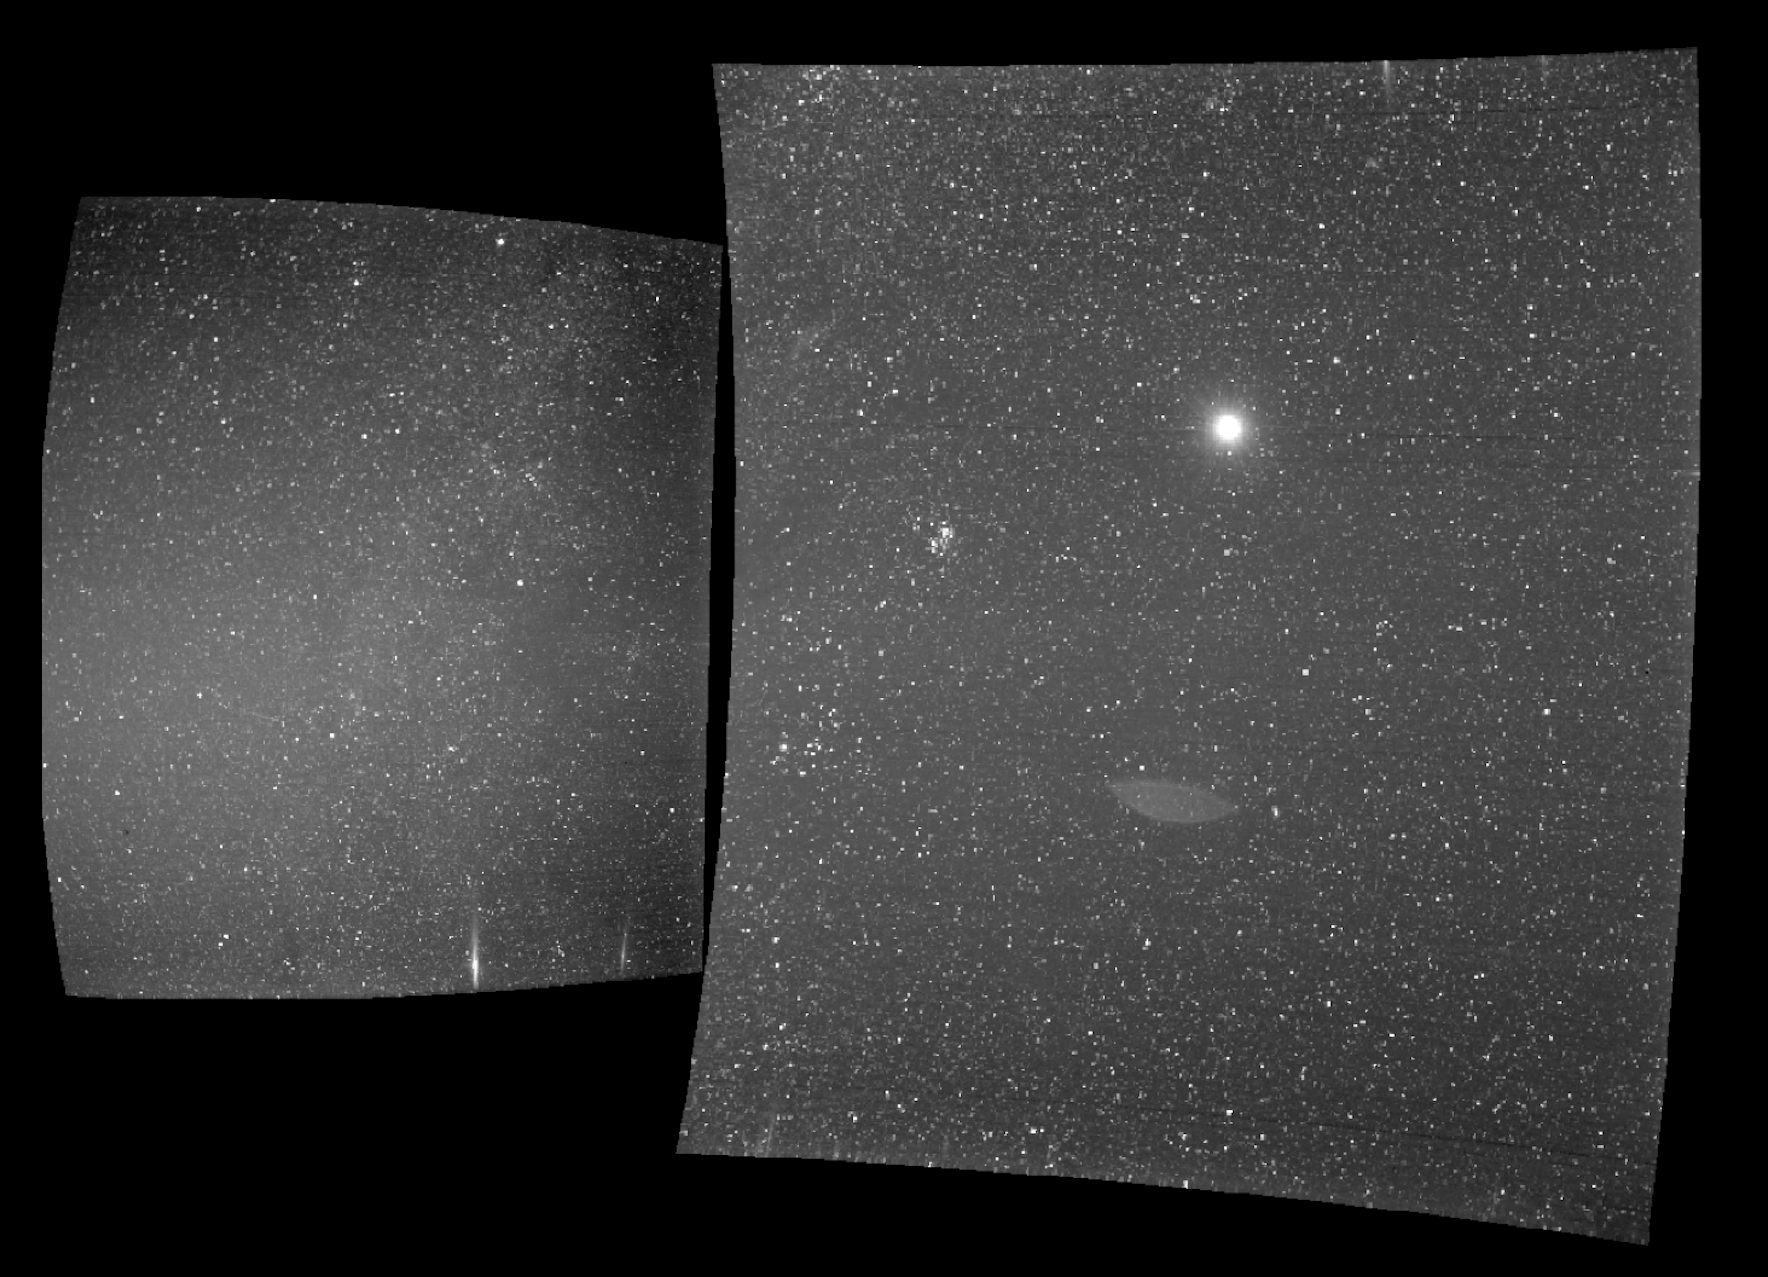 Parker Solar Probe view of Earth and surrounding sky. Against a black background, two slightly curved boxes show the sky in black and white. The box on the left is smaller, and mostly shows white stars against a gray sky, with a few bright white streaks along the bottom edge, which is a lens reflection. The bigger box on the right shows even more starts. A bright circle in the upper center of this box is Earth.